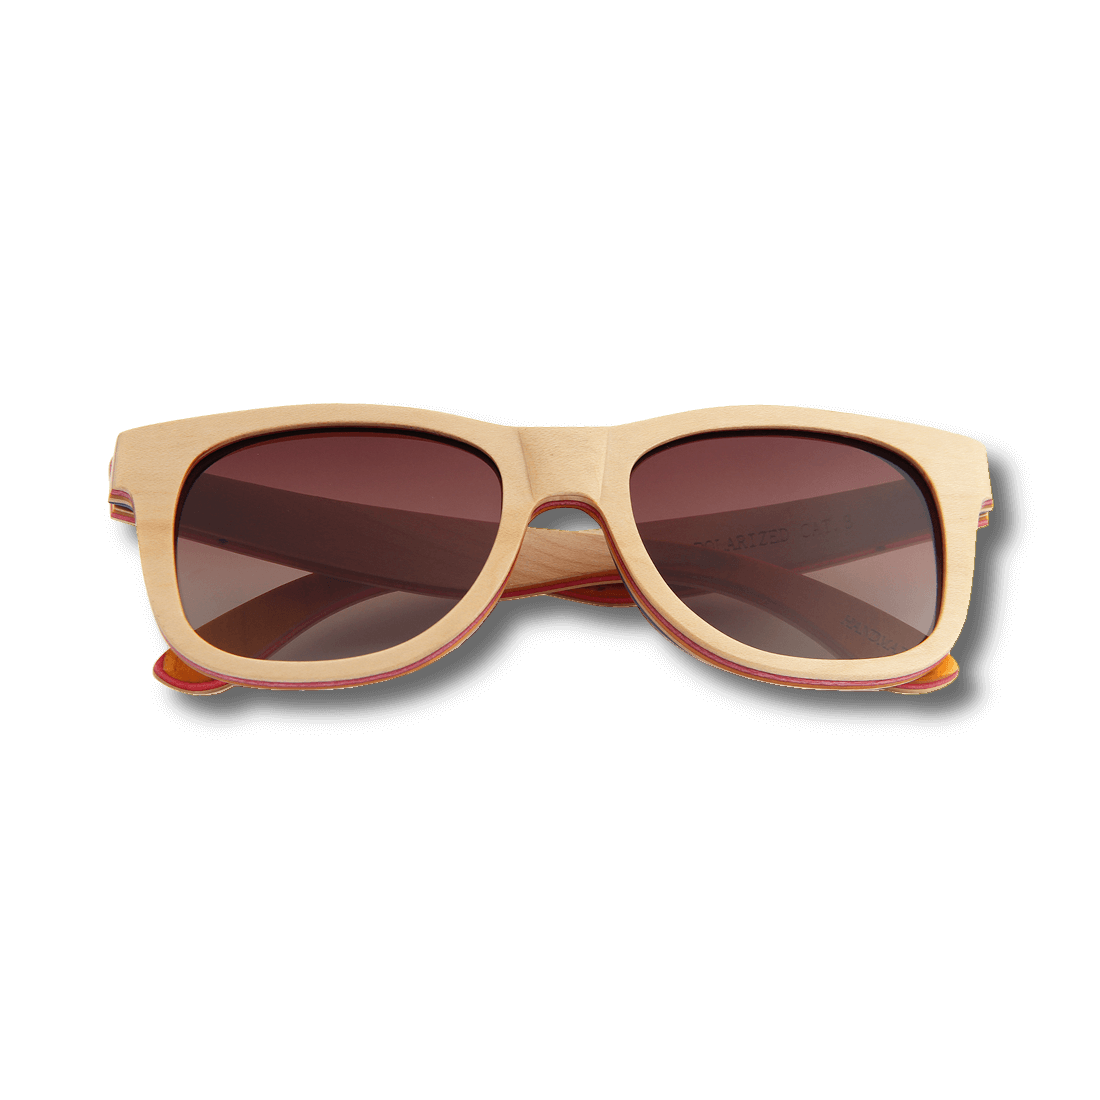 Recycled Skatedeck Kickflip Natural Sunglasses by WUDN, Sunglasses - WUDN